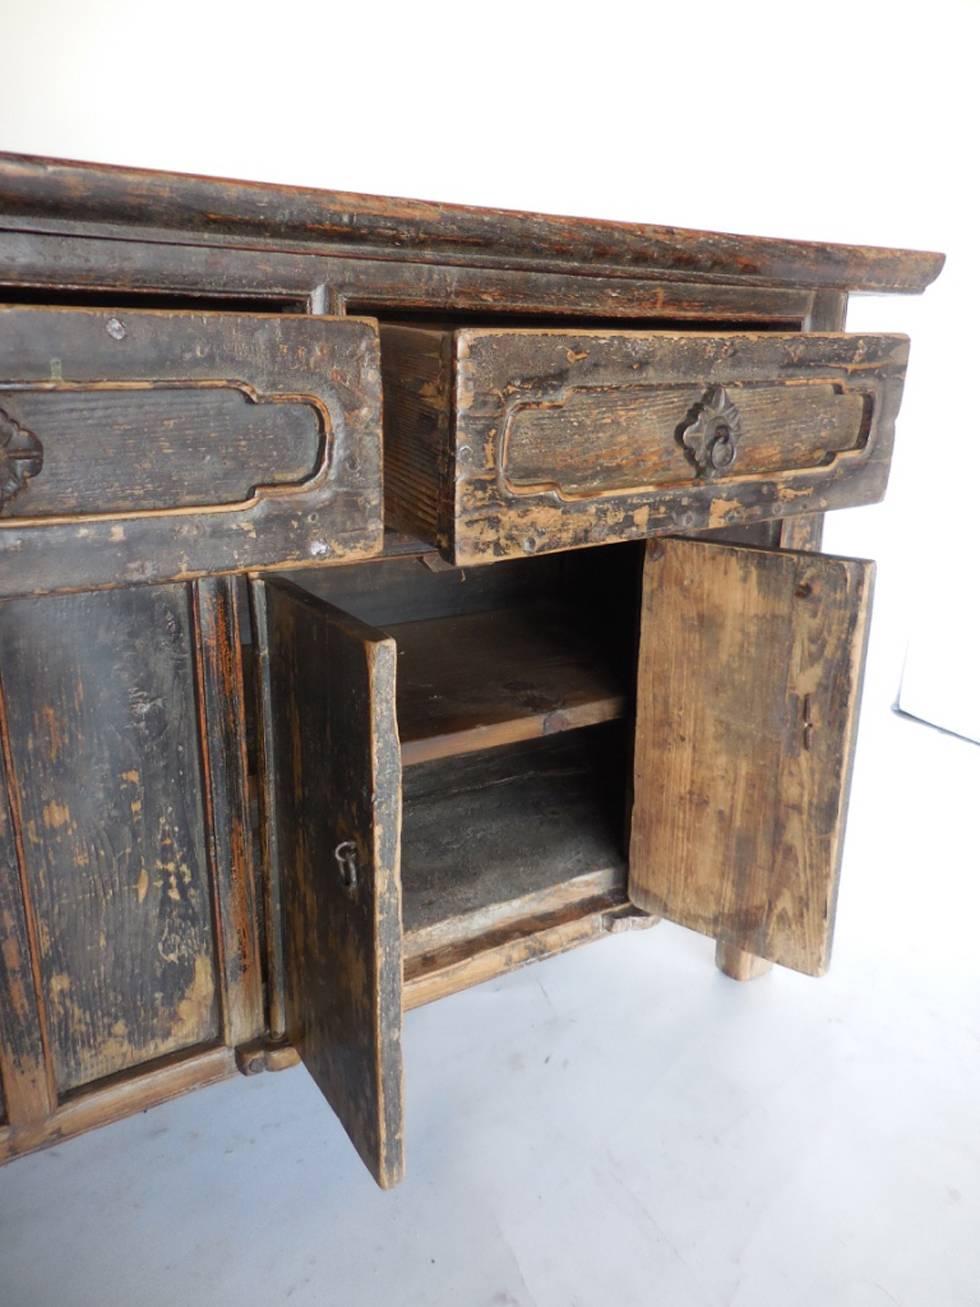 Qing dynasty coffer. Three large drawers and bottom storage area with doors. Old black worn paint. Carved wood rosettes. Wooden hinges. In very good condition for its age, all original with dovetailed drawers. Interior shelf added later. Back is